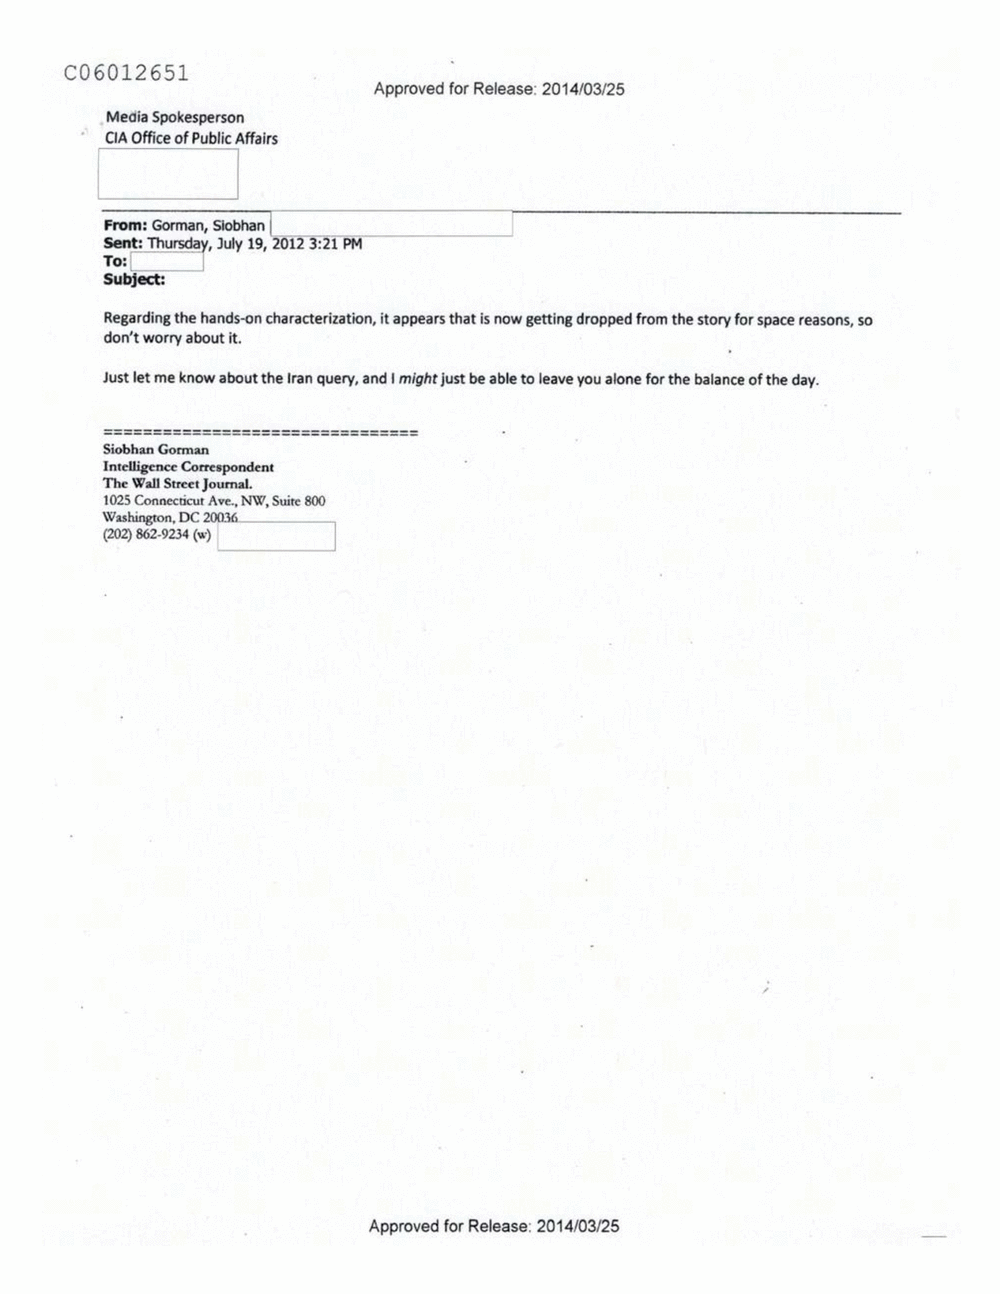 Page 227 from Email Correspondence Between Reporters and CIA Flacks